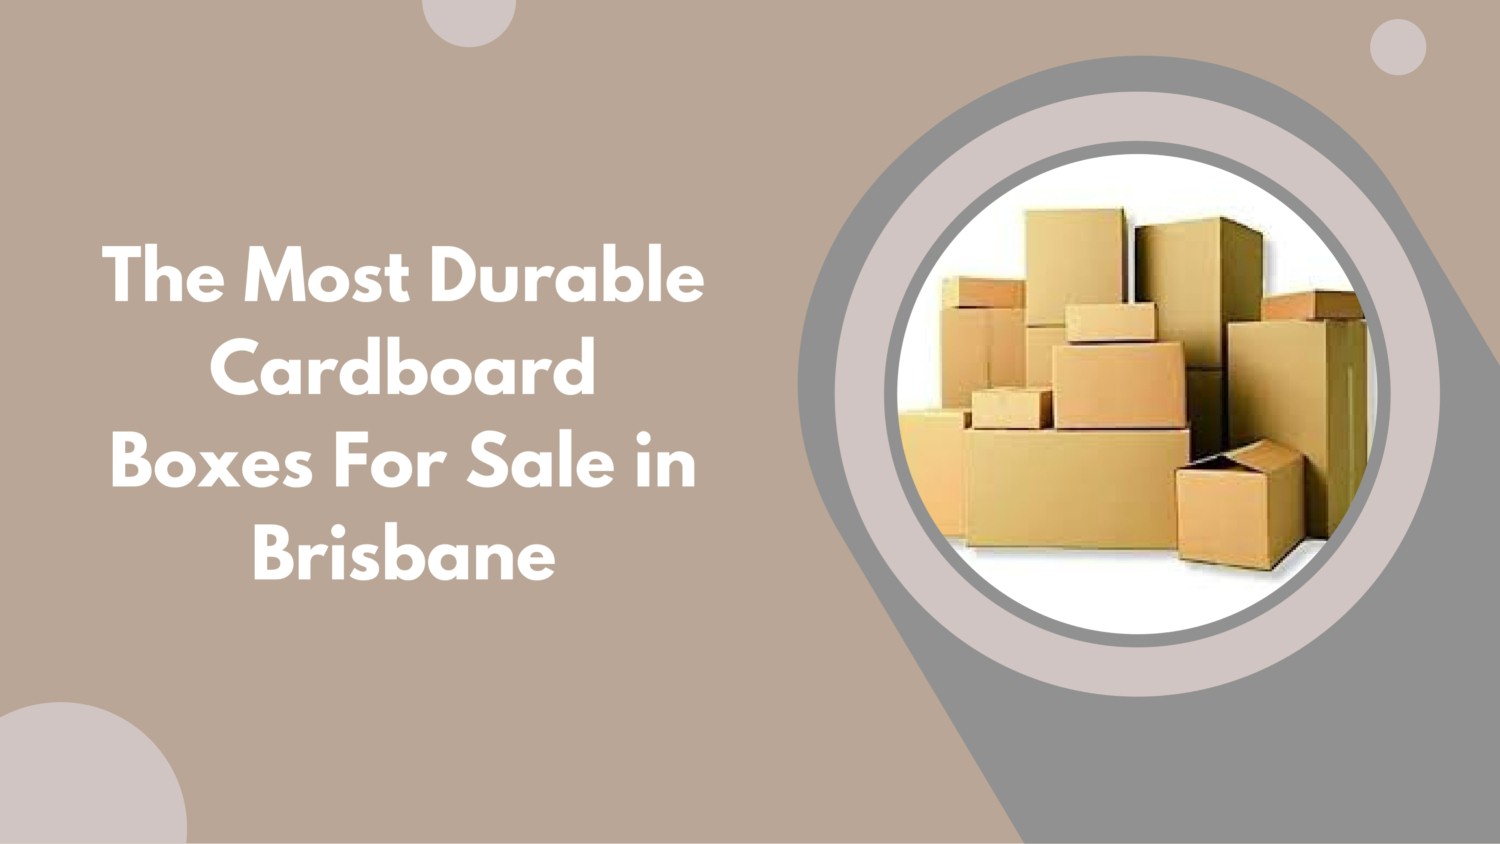 The Most Durable Cardboard Boxes For Sale in Brisbane